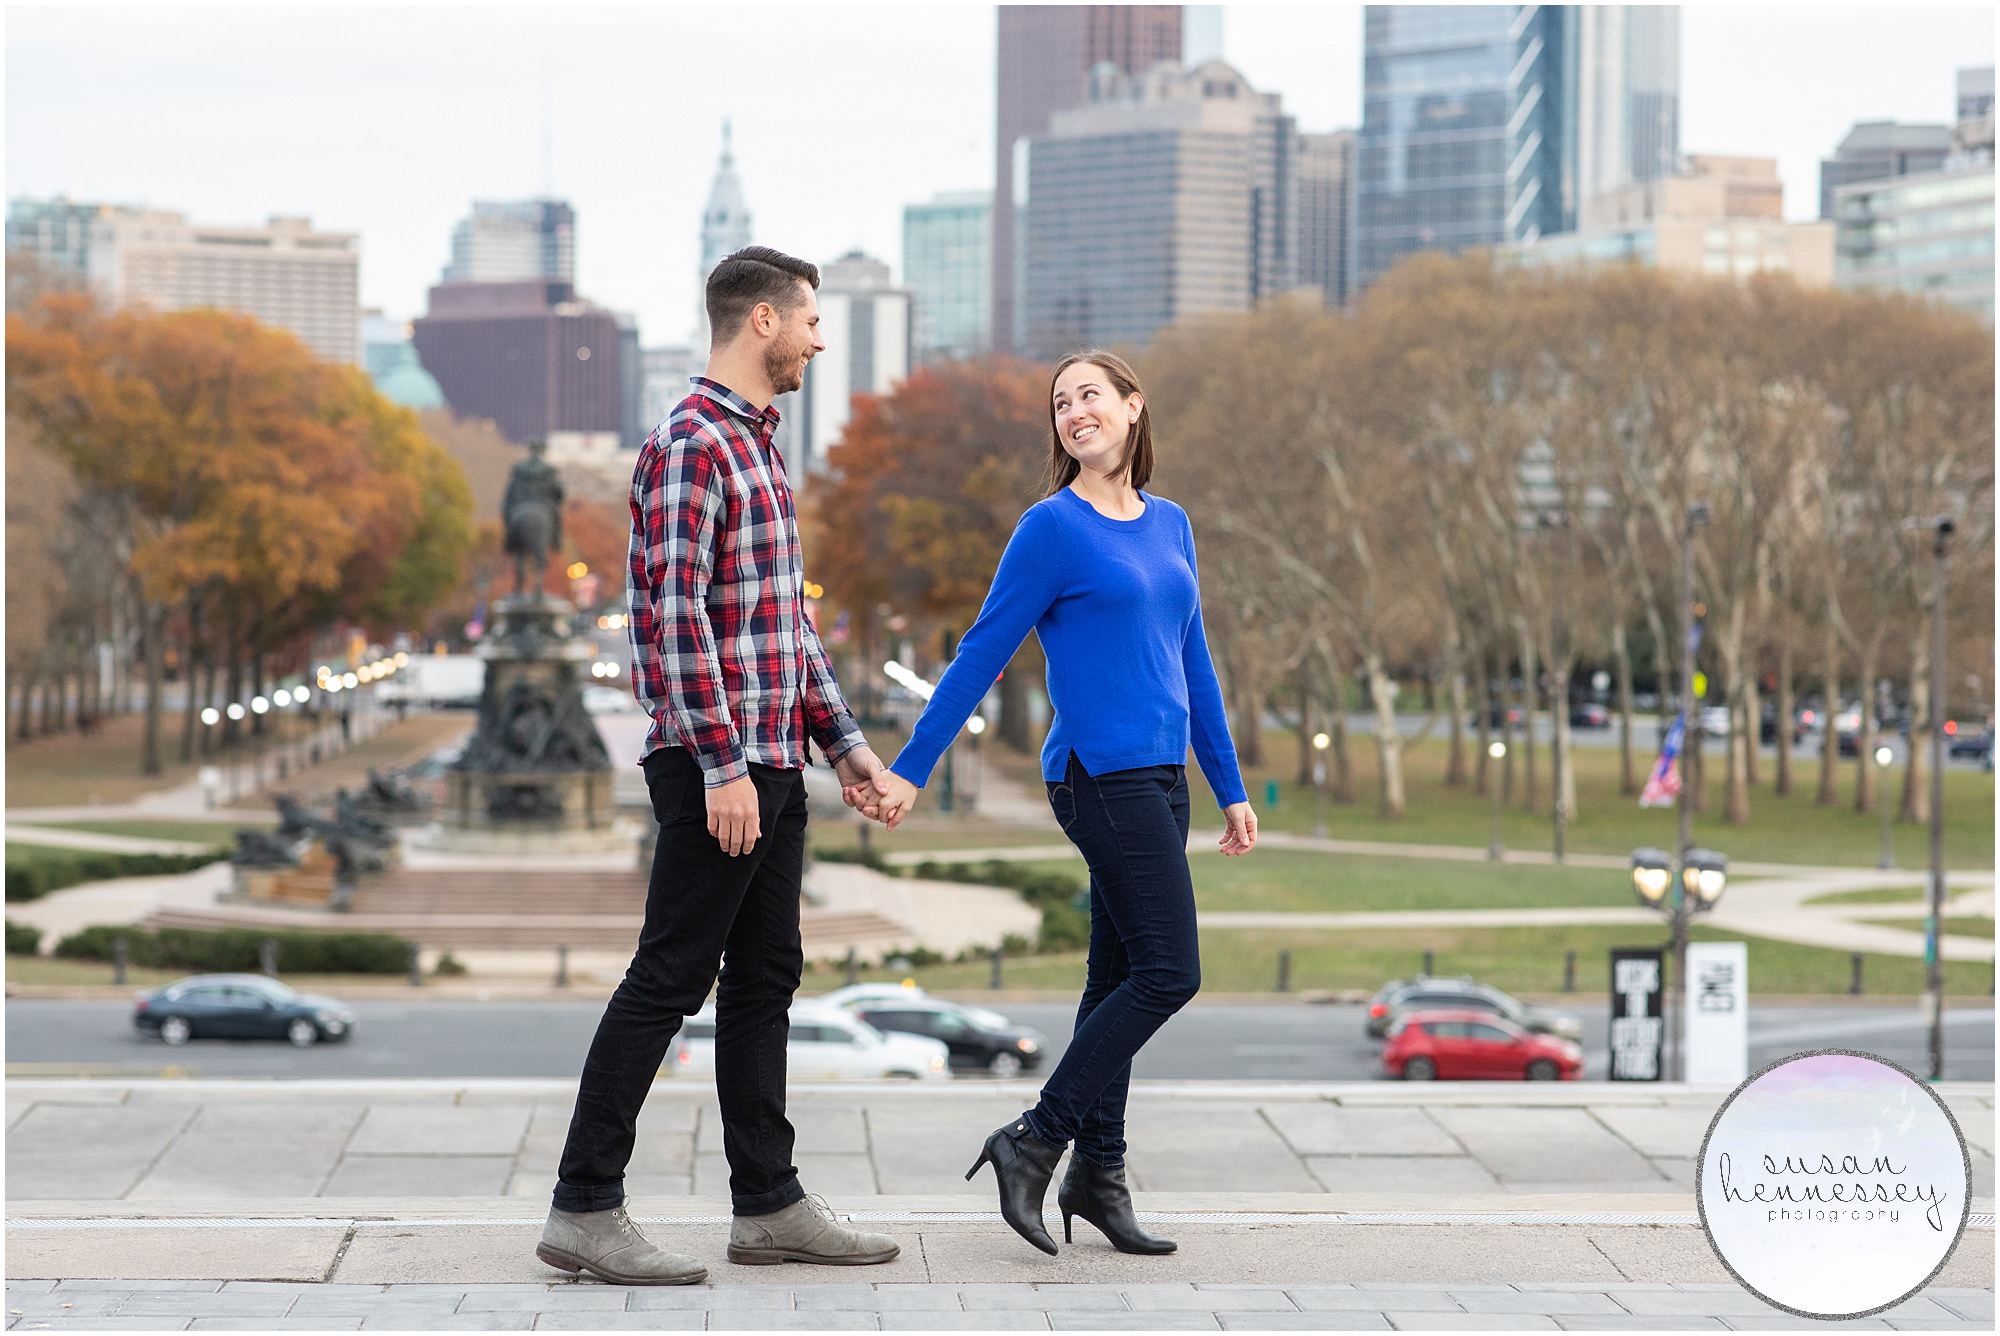 Engagement session at the top of the Art Museum stairs in Philadelphia